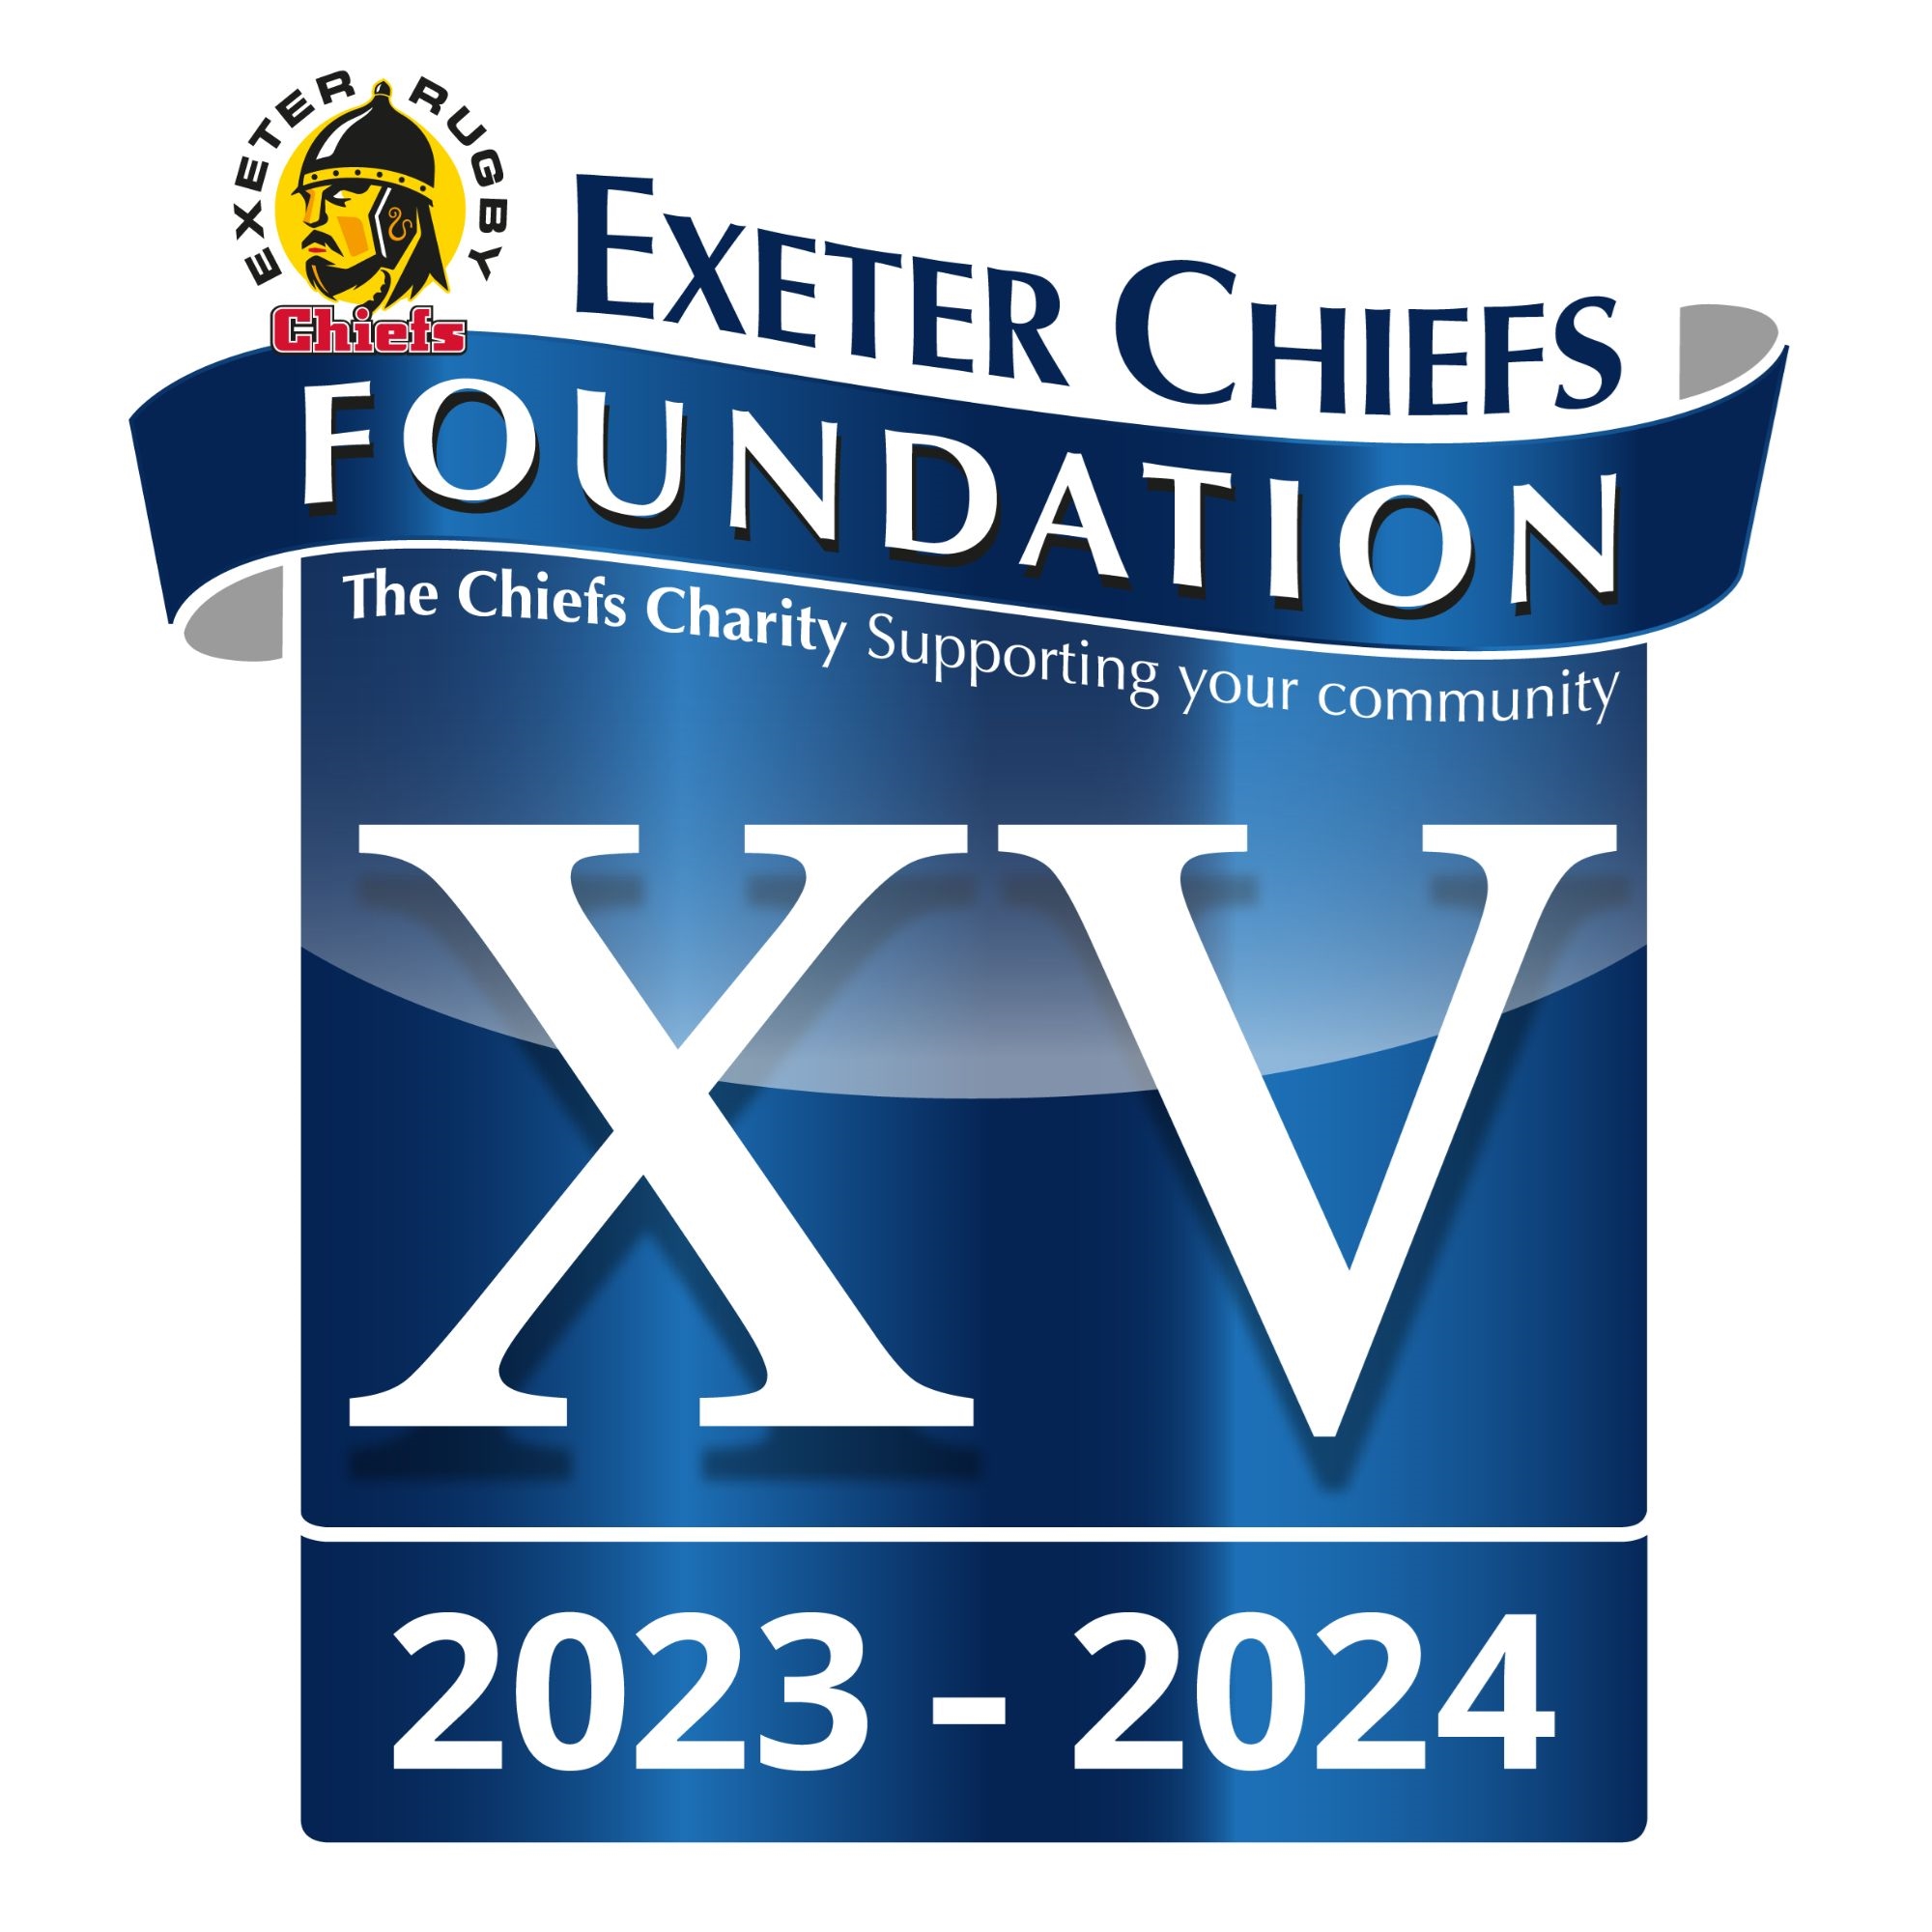 Exeter chiefs foundation